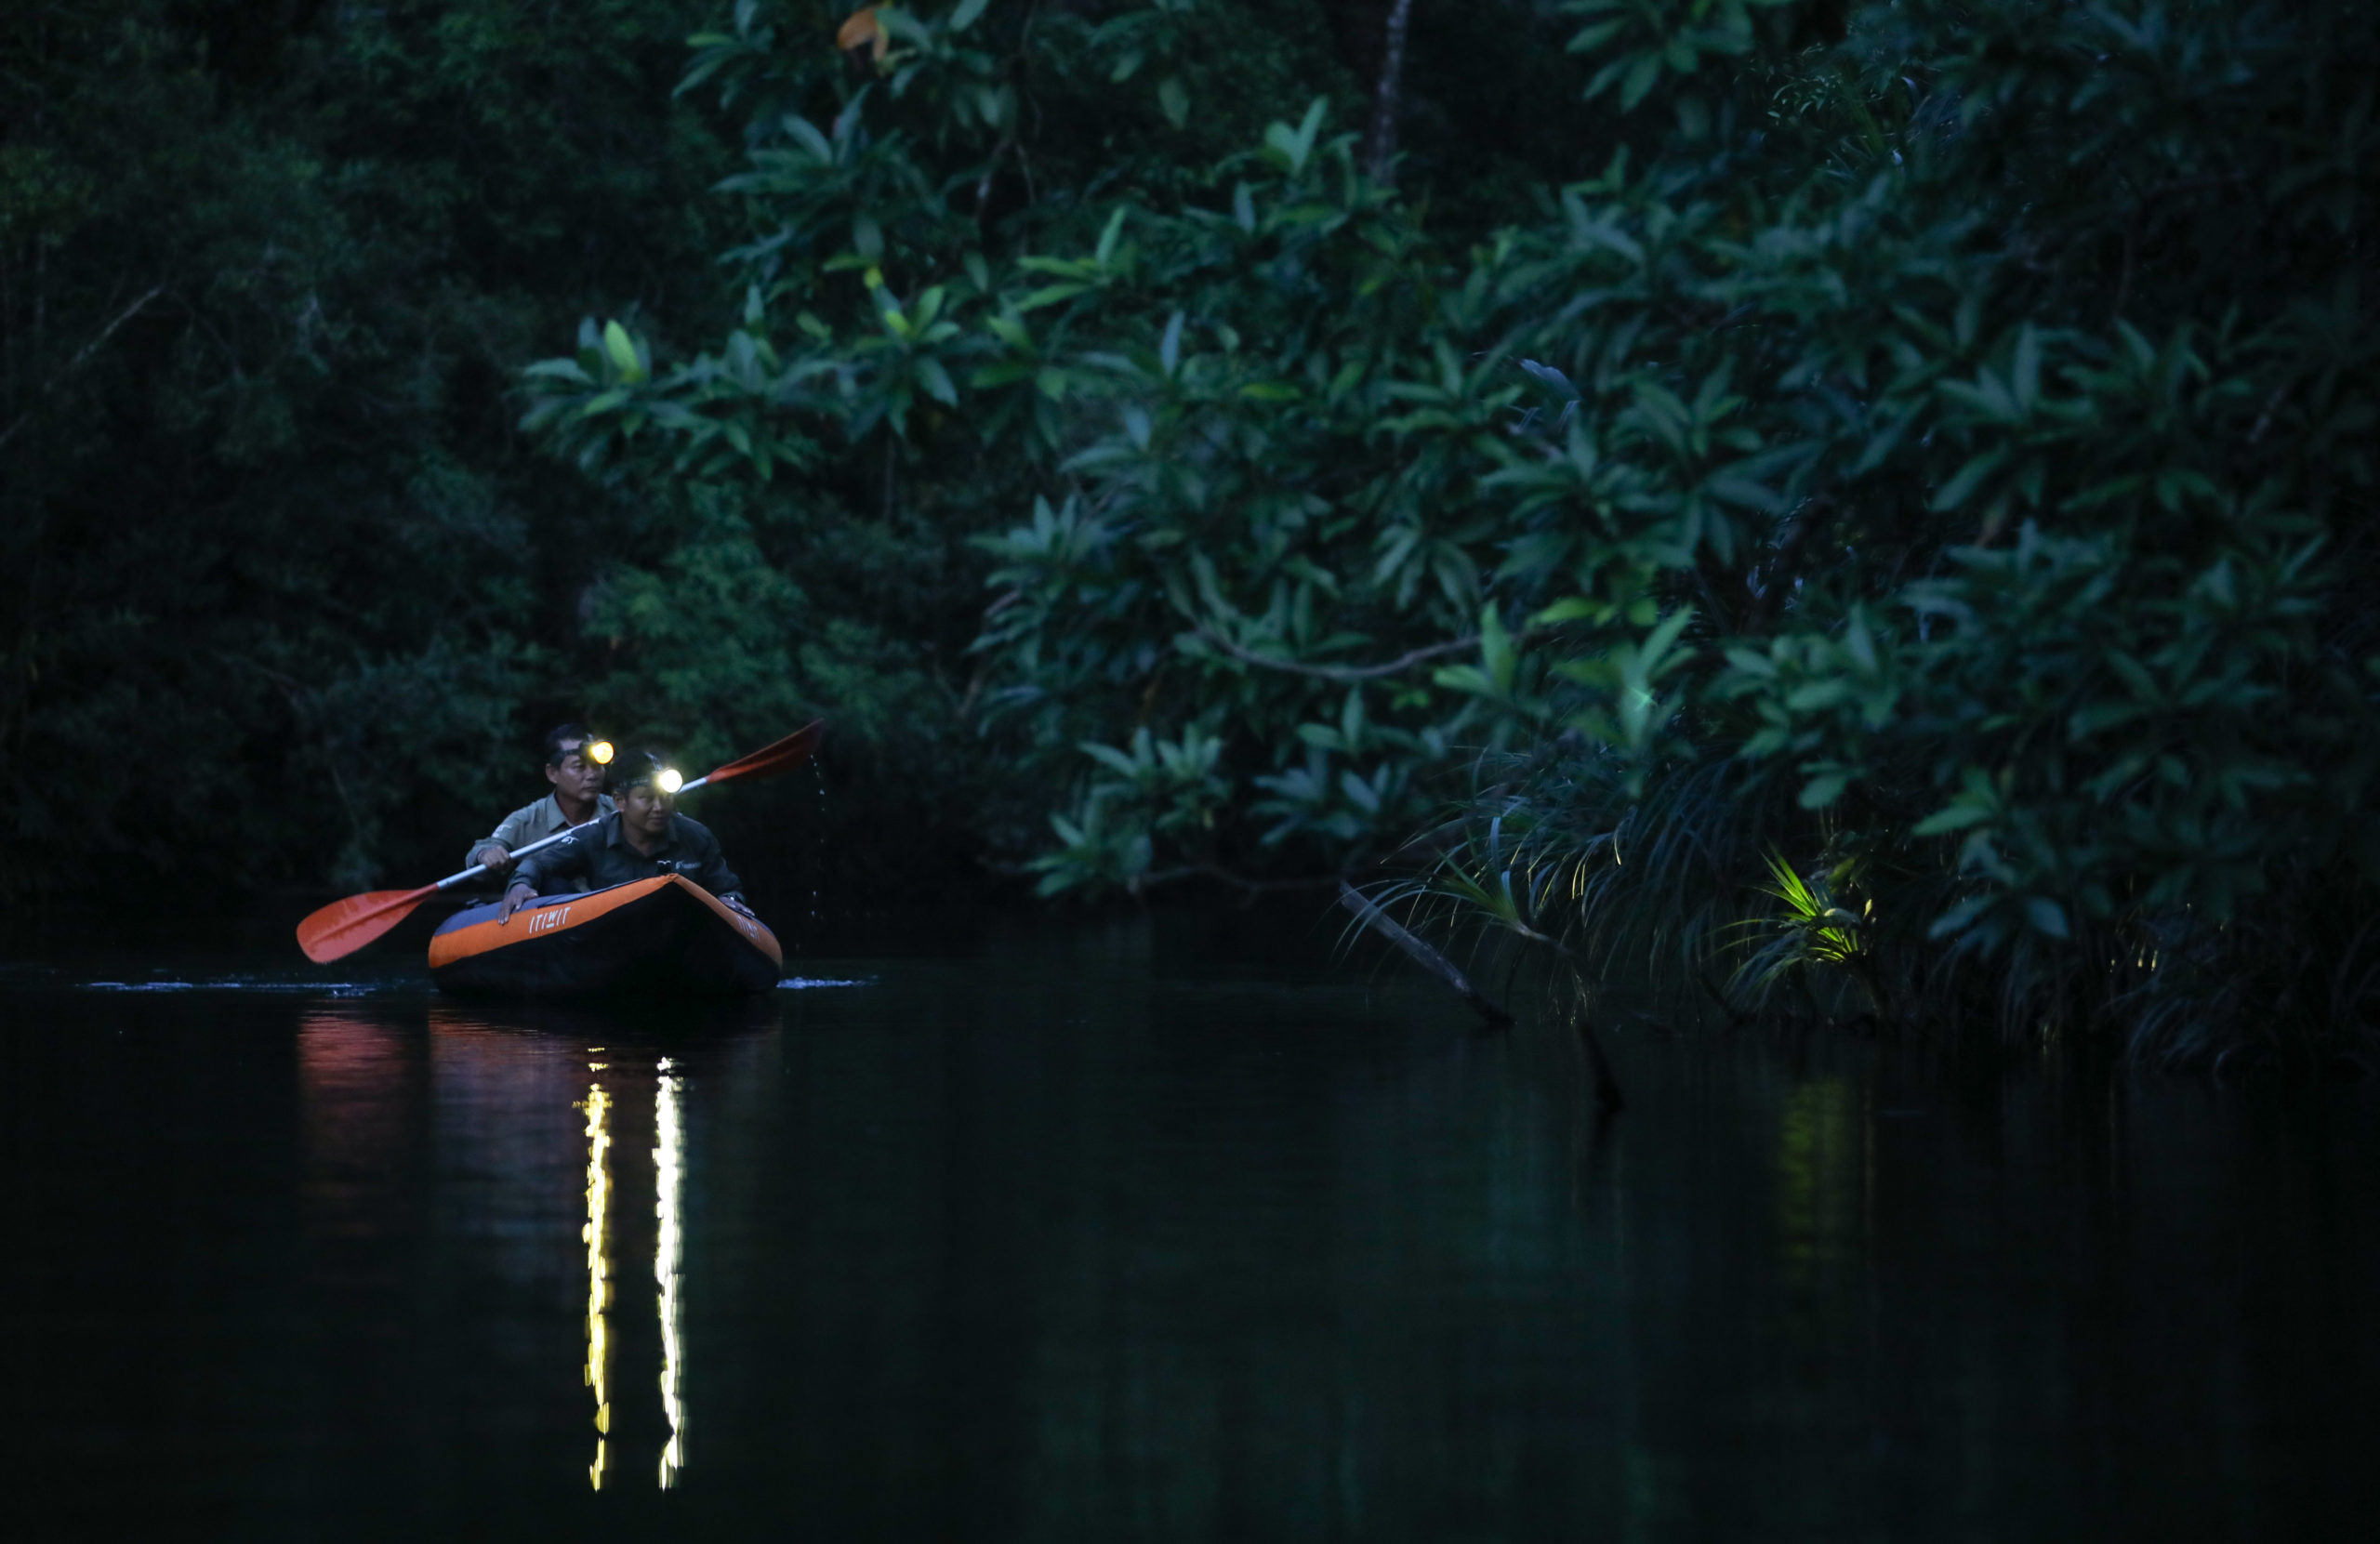 Hor Leng (left) and Sam Han (right), veteran members of the Cambodian Crocodile Conservation Project, conduct a night survey of Siamese crocodiles following a release in the Sre Ambel River 